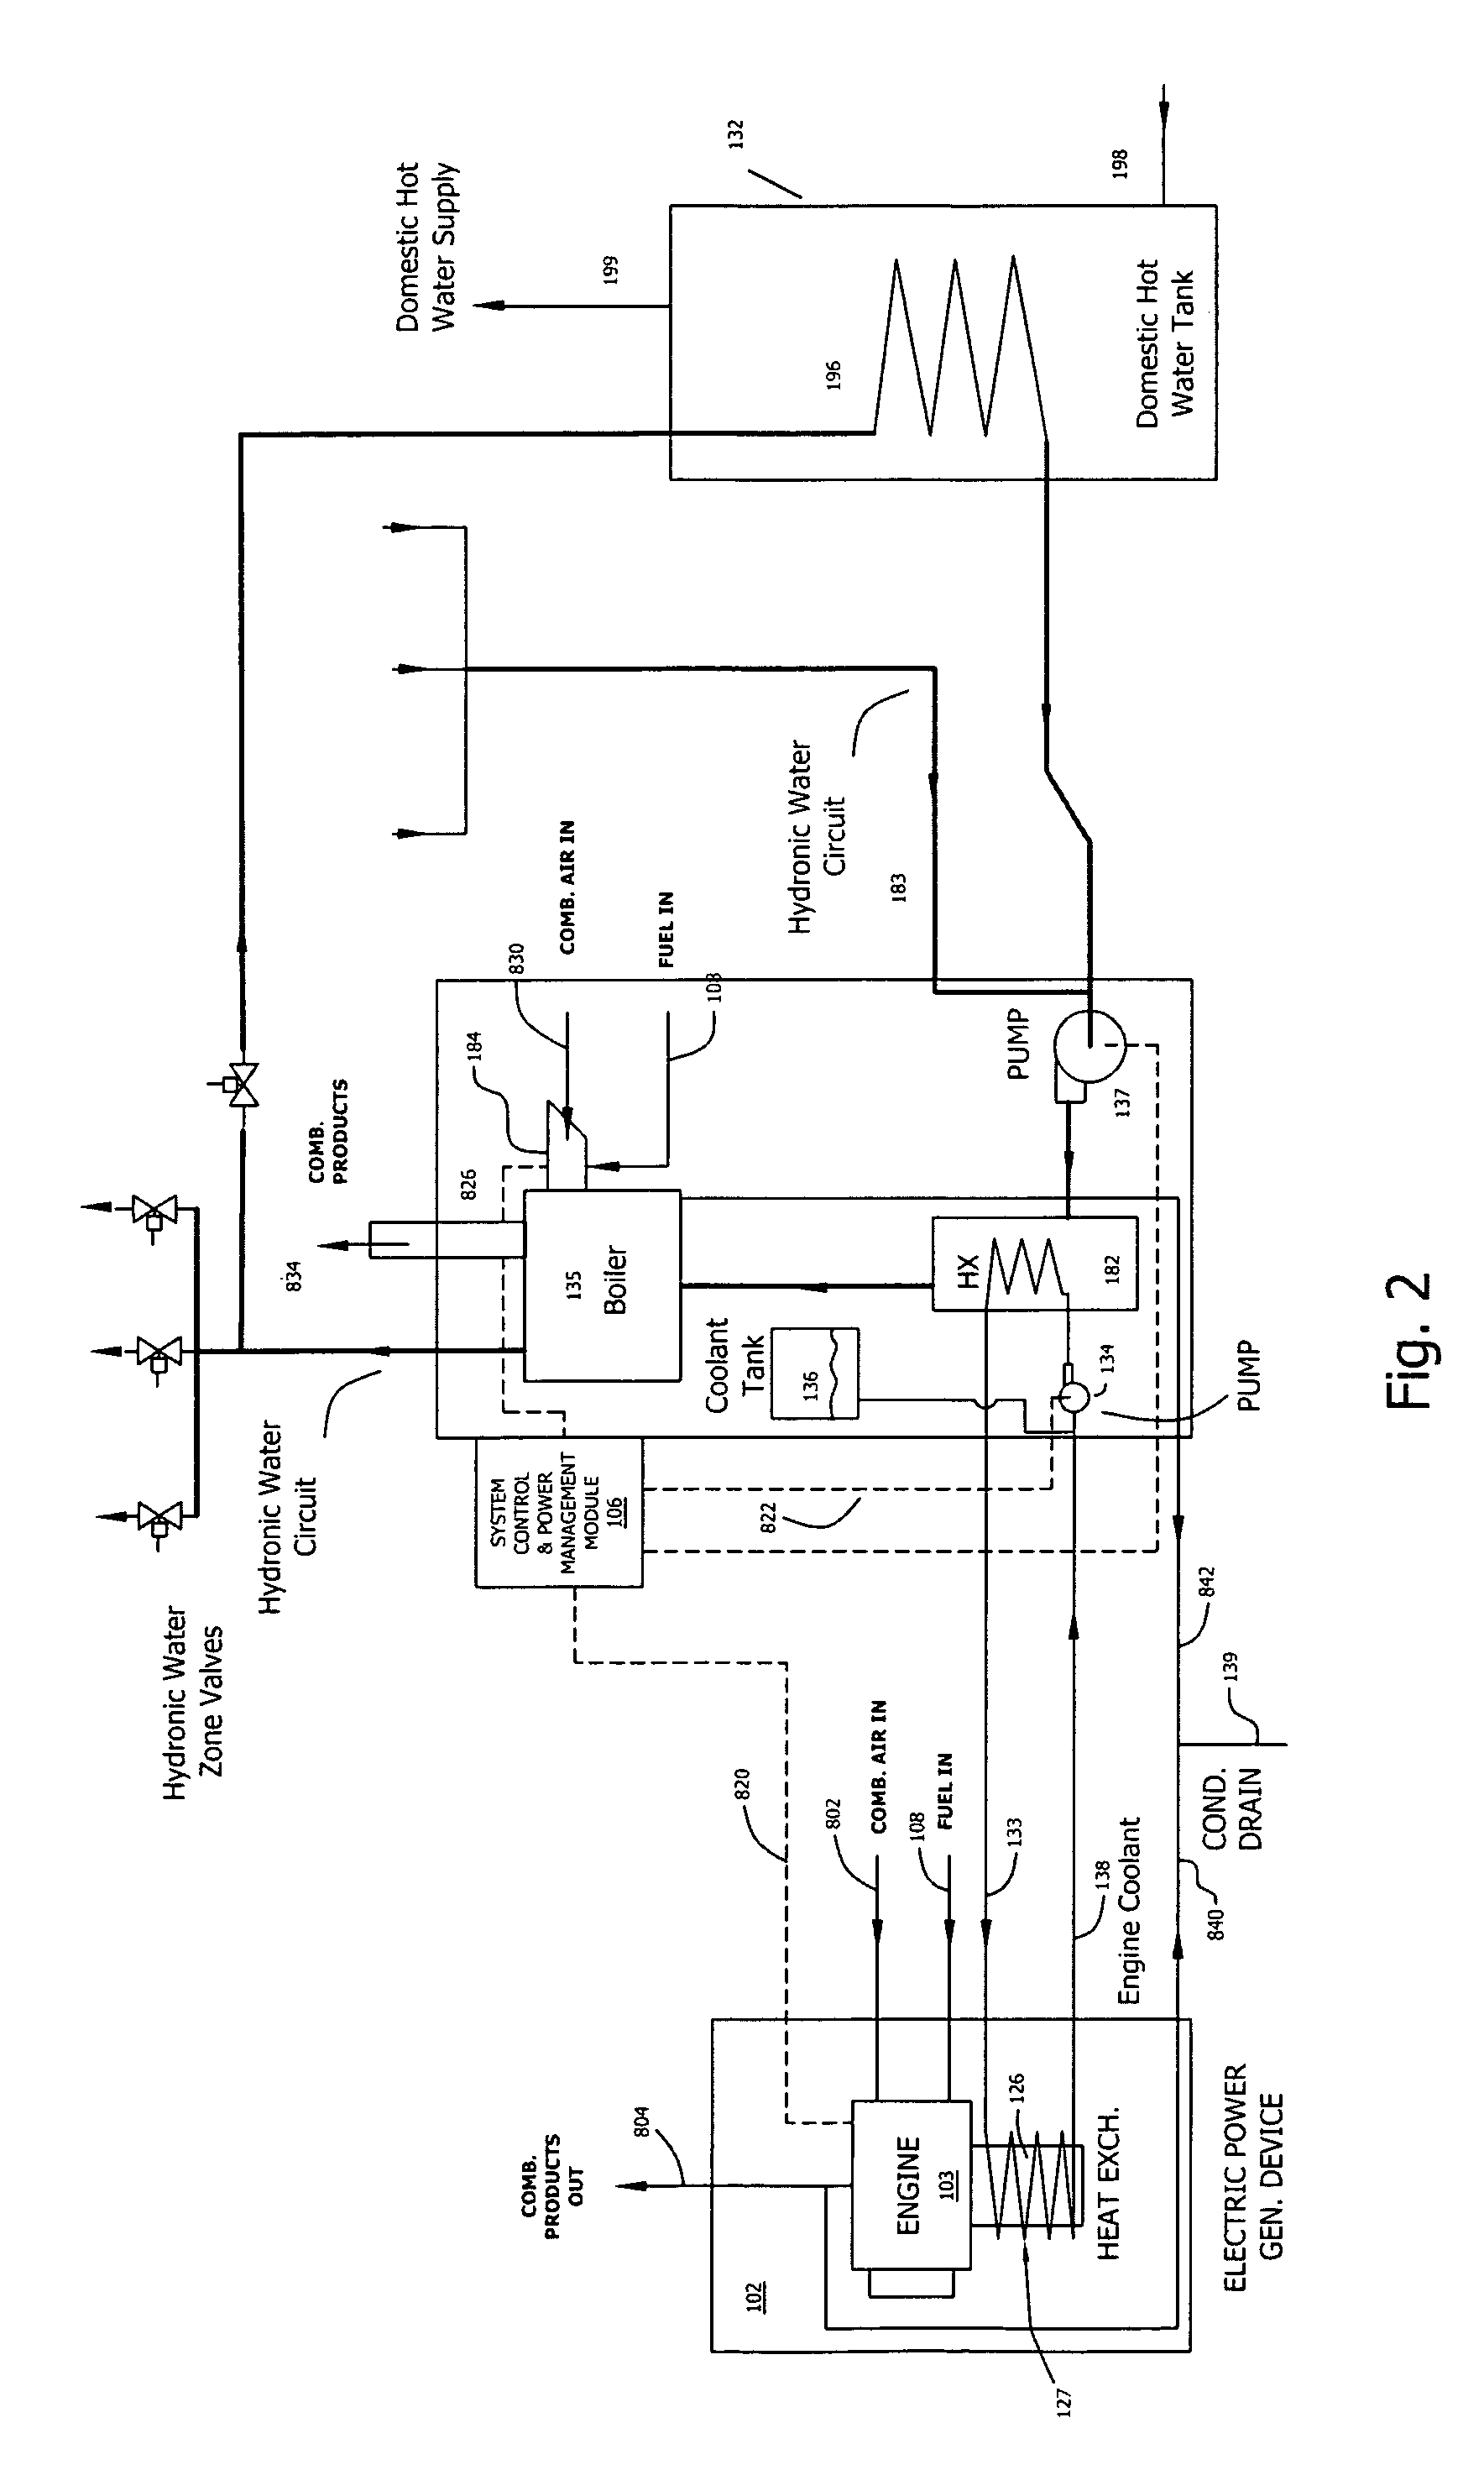 System and method for hydronic space heating with electrical power generation